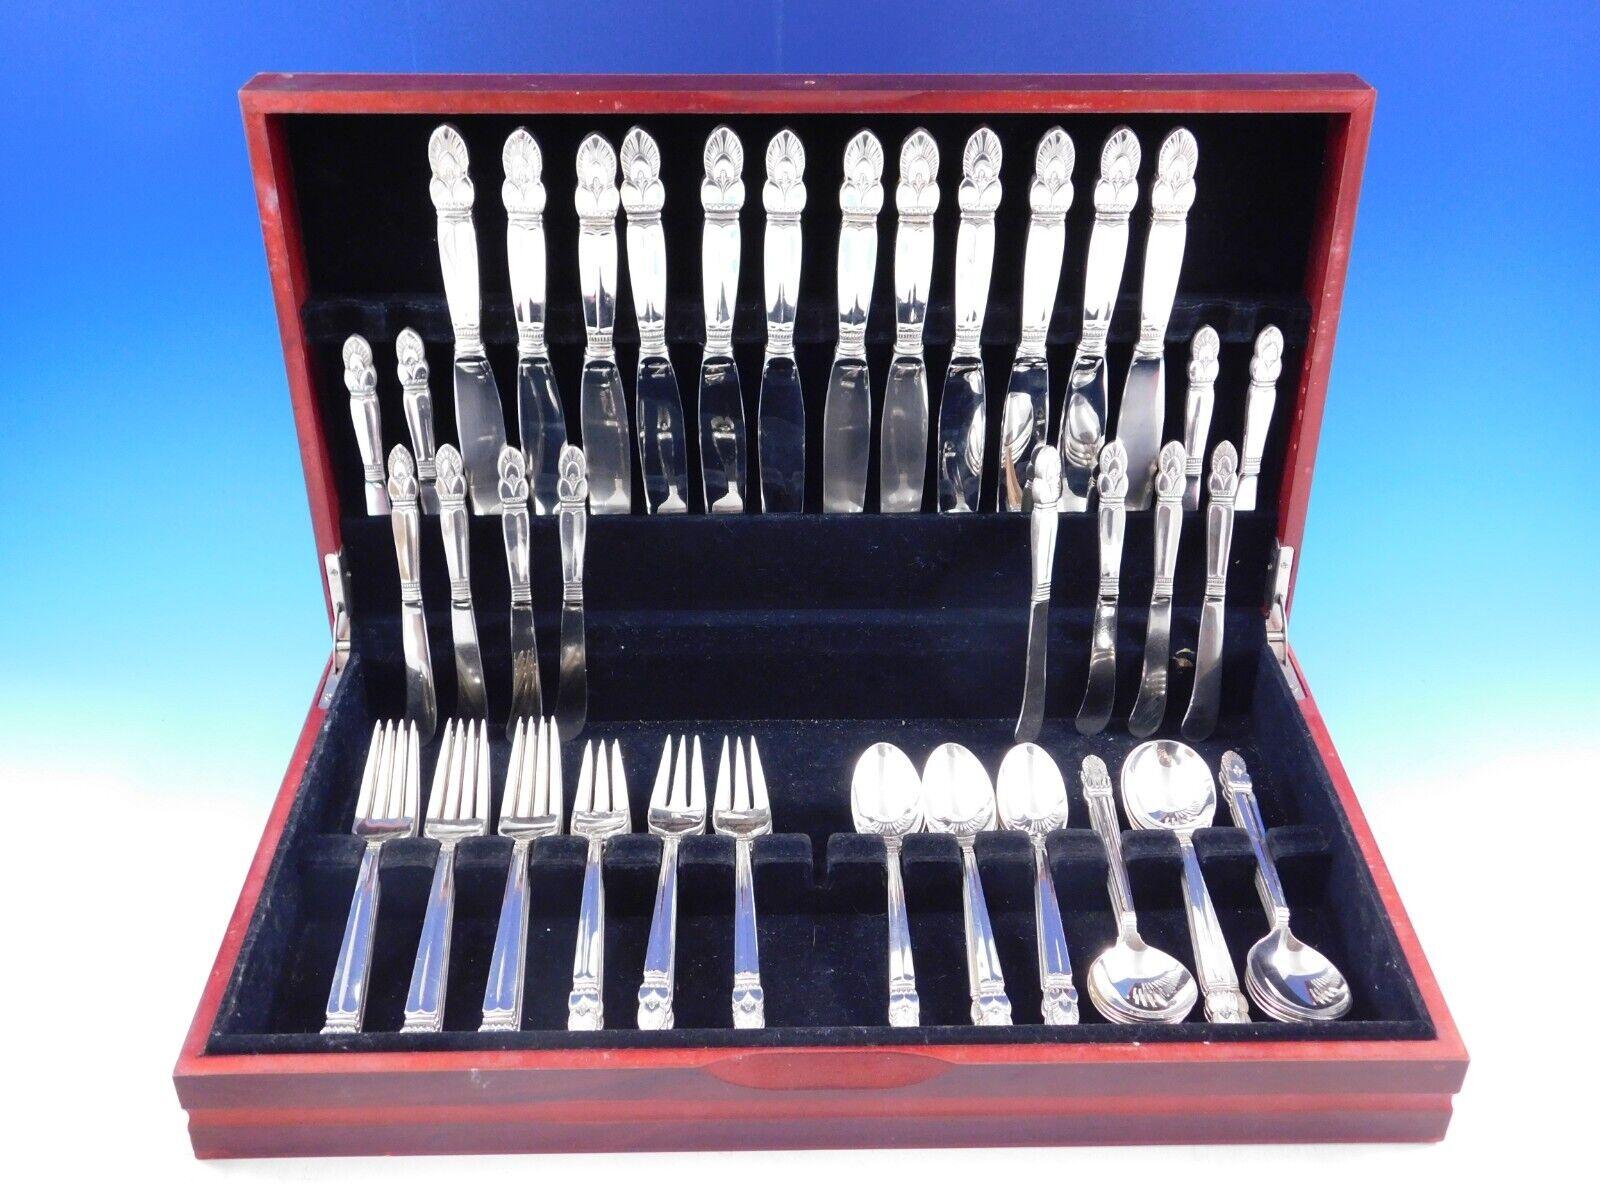 Dinner Size Princess Ingrid by Frank Whiting Sterling Silver Flatware set - 72 pieces. This set includes:

12 Dinner Size Knives, 9 3/4